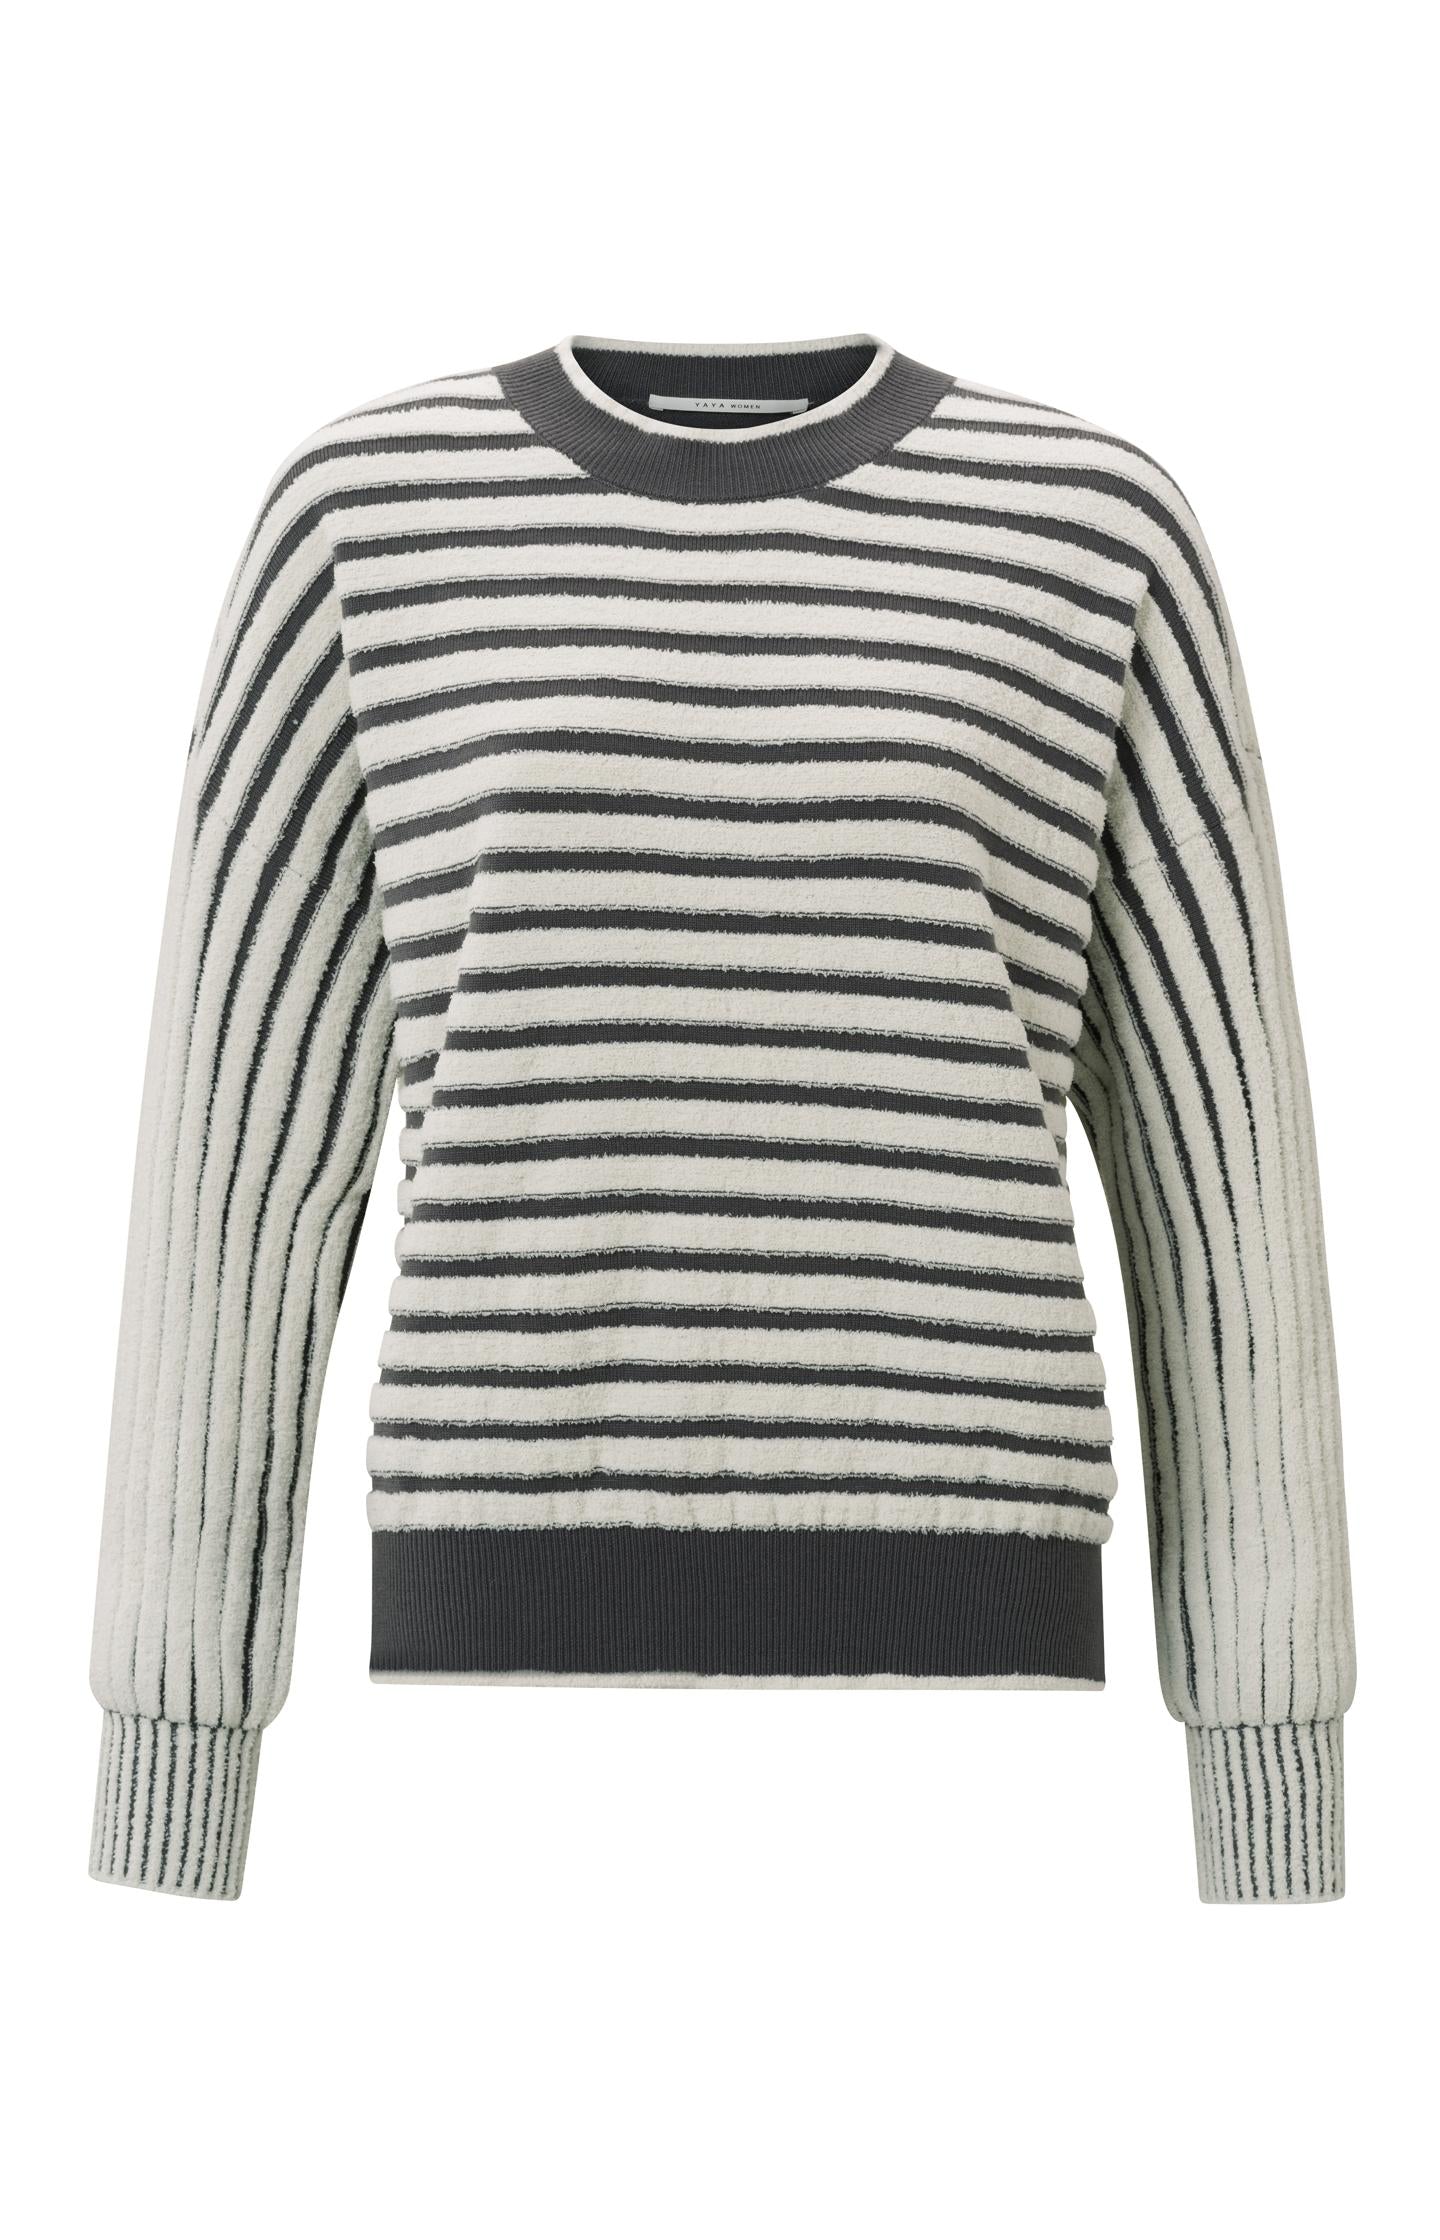 Striped sweater with crewneck, long sleeves and frayed seams - Type: product